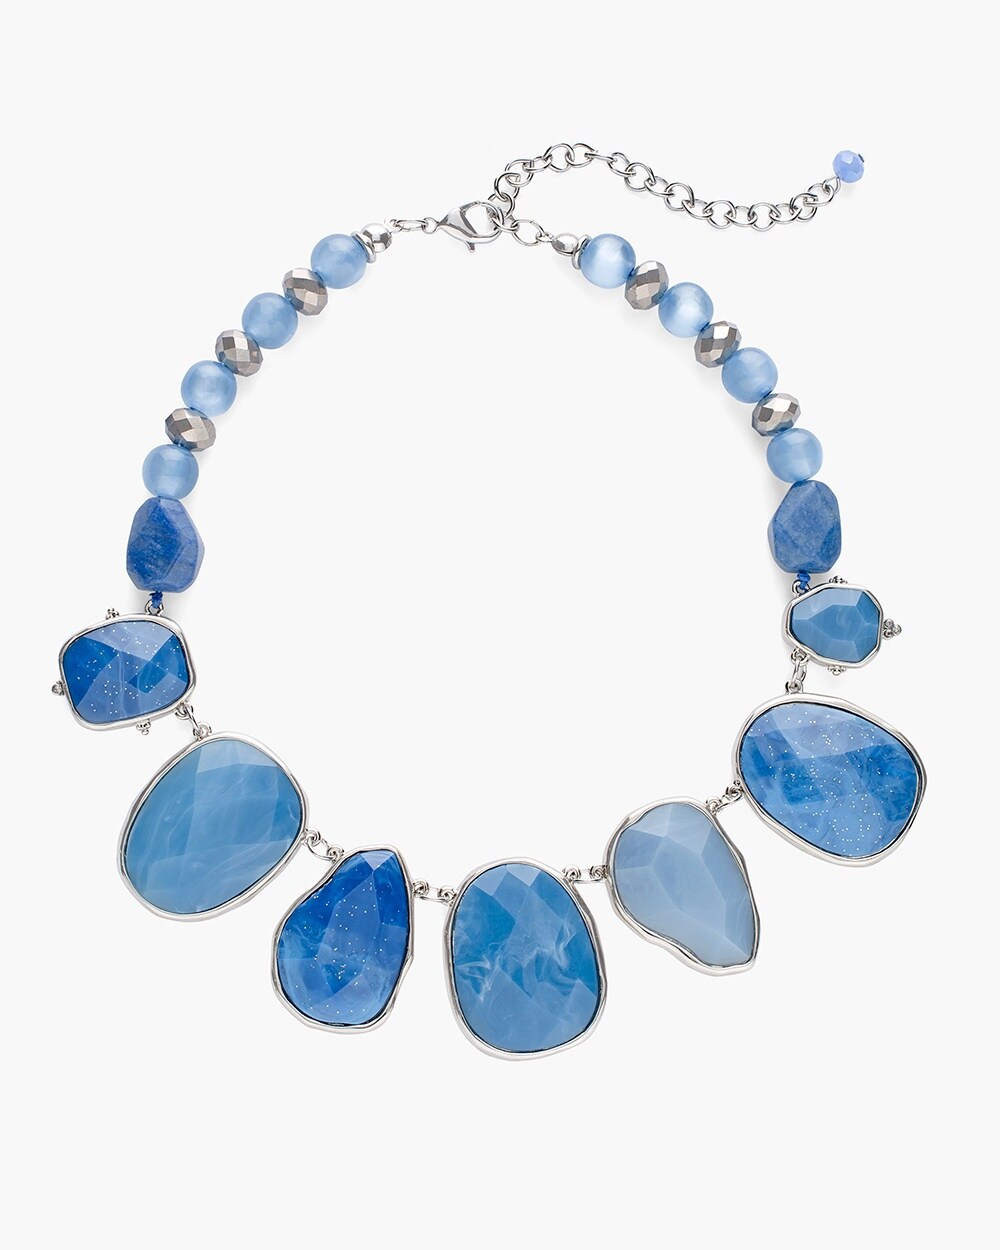 Blue and Silver-Tone Bib Necklace